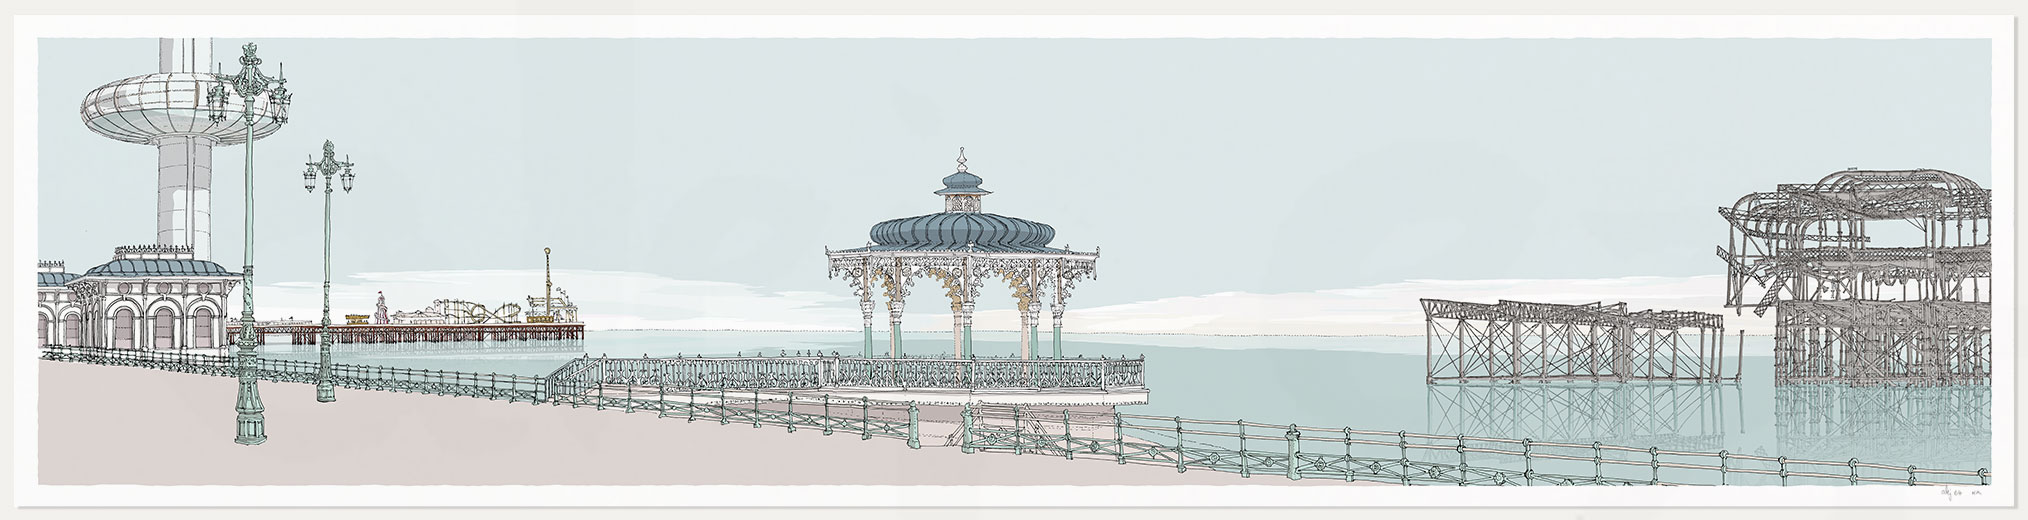 Fine art print named I360, Palace Pier, The Bandstand and The West Pier Pebble Beach by artist alej ez